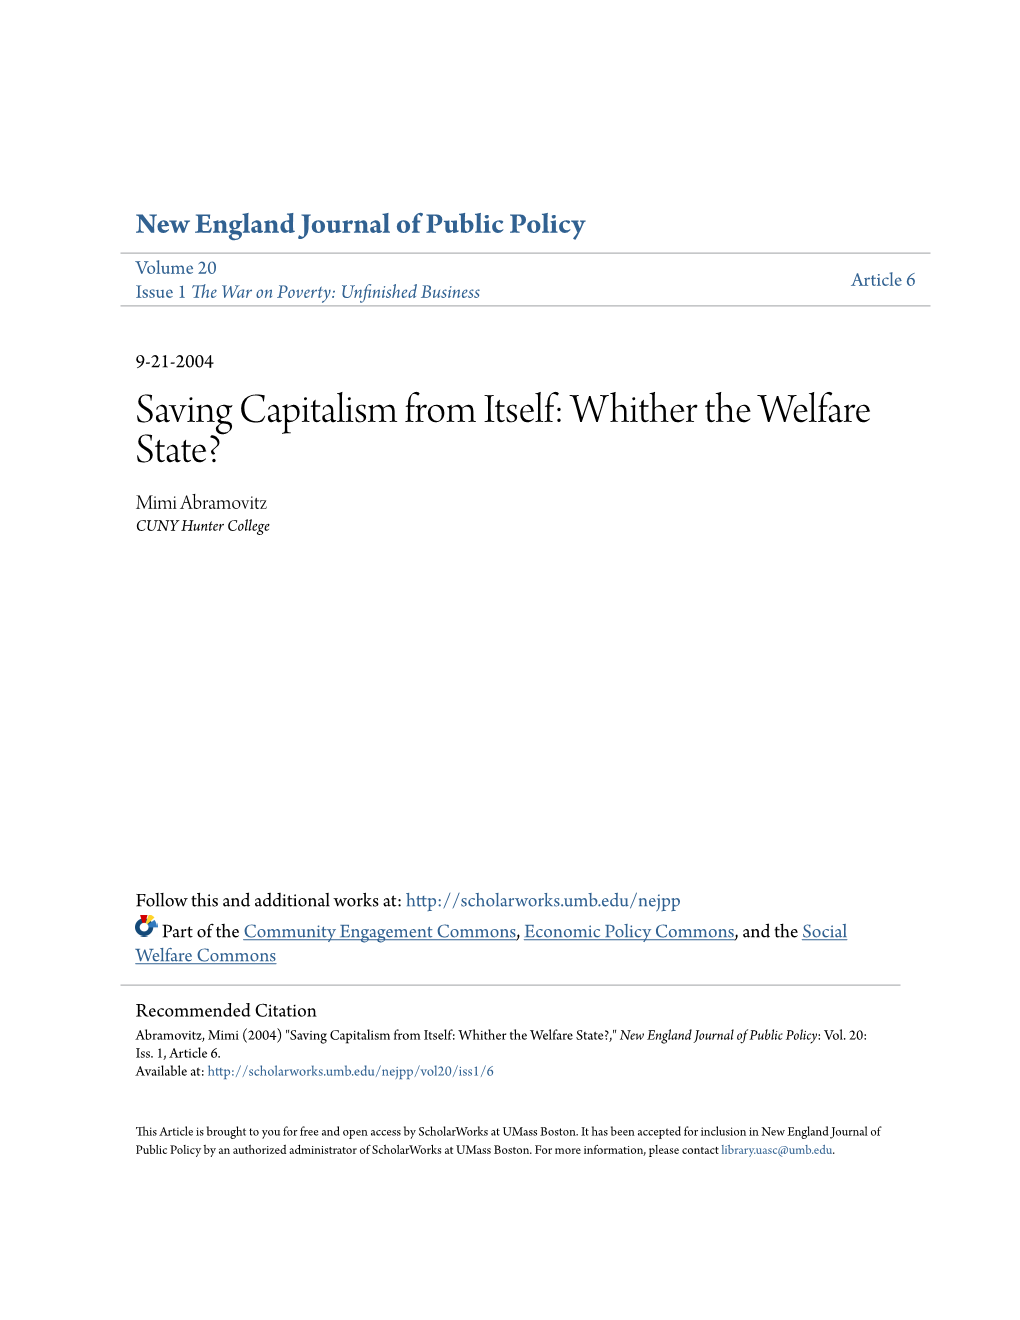 Saving Capitalism from Itself: Whither the Welfare State? Mimi Abramovitz CUNY Hunter College